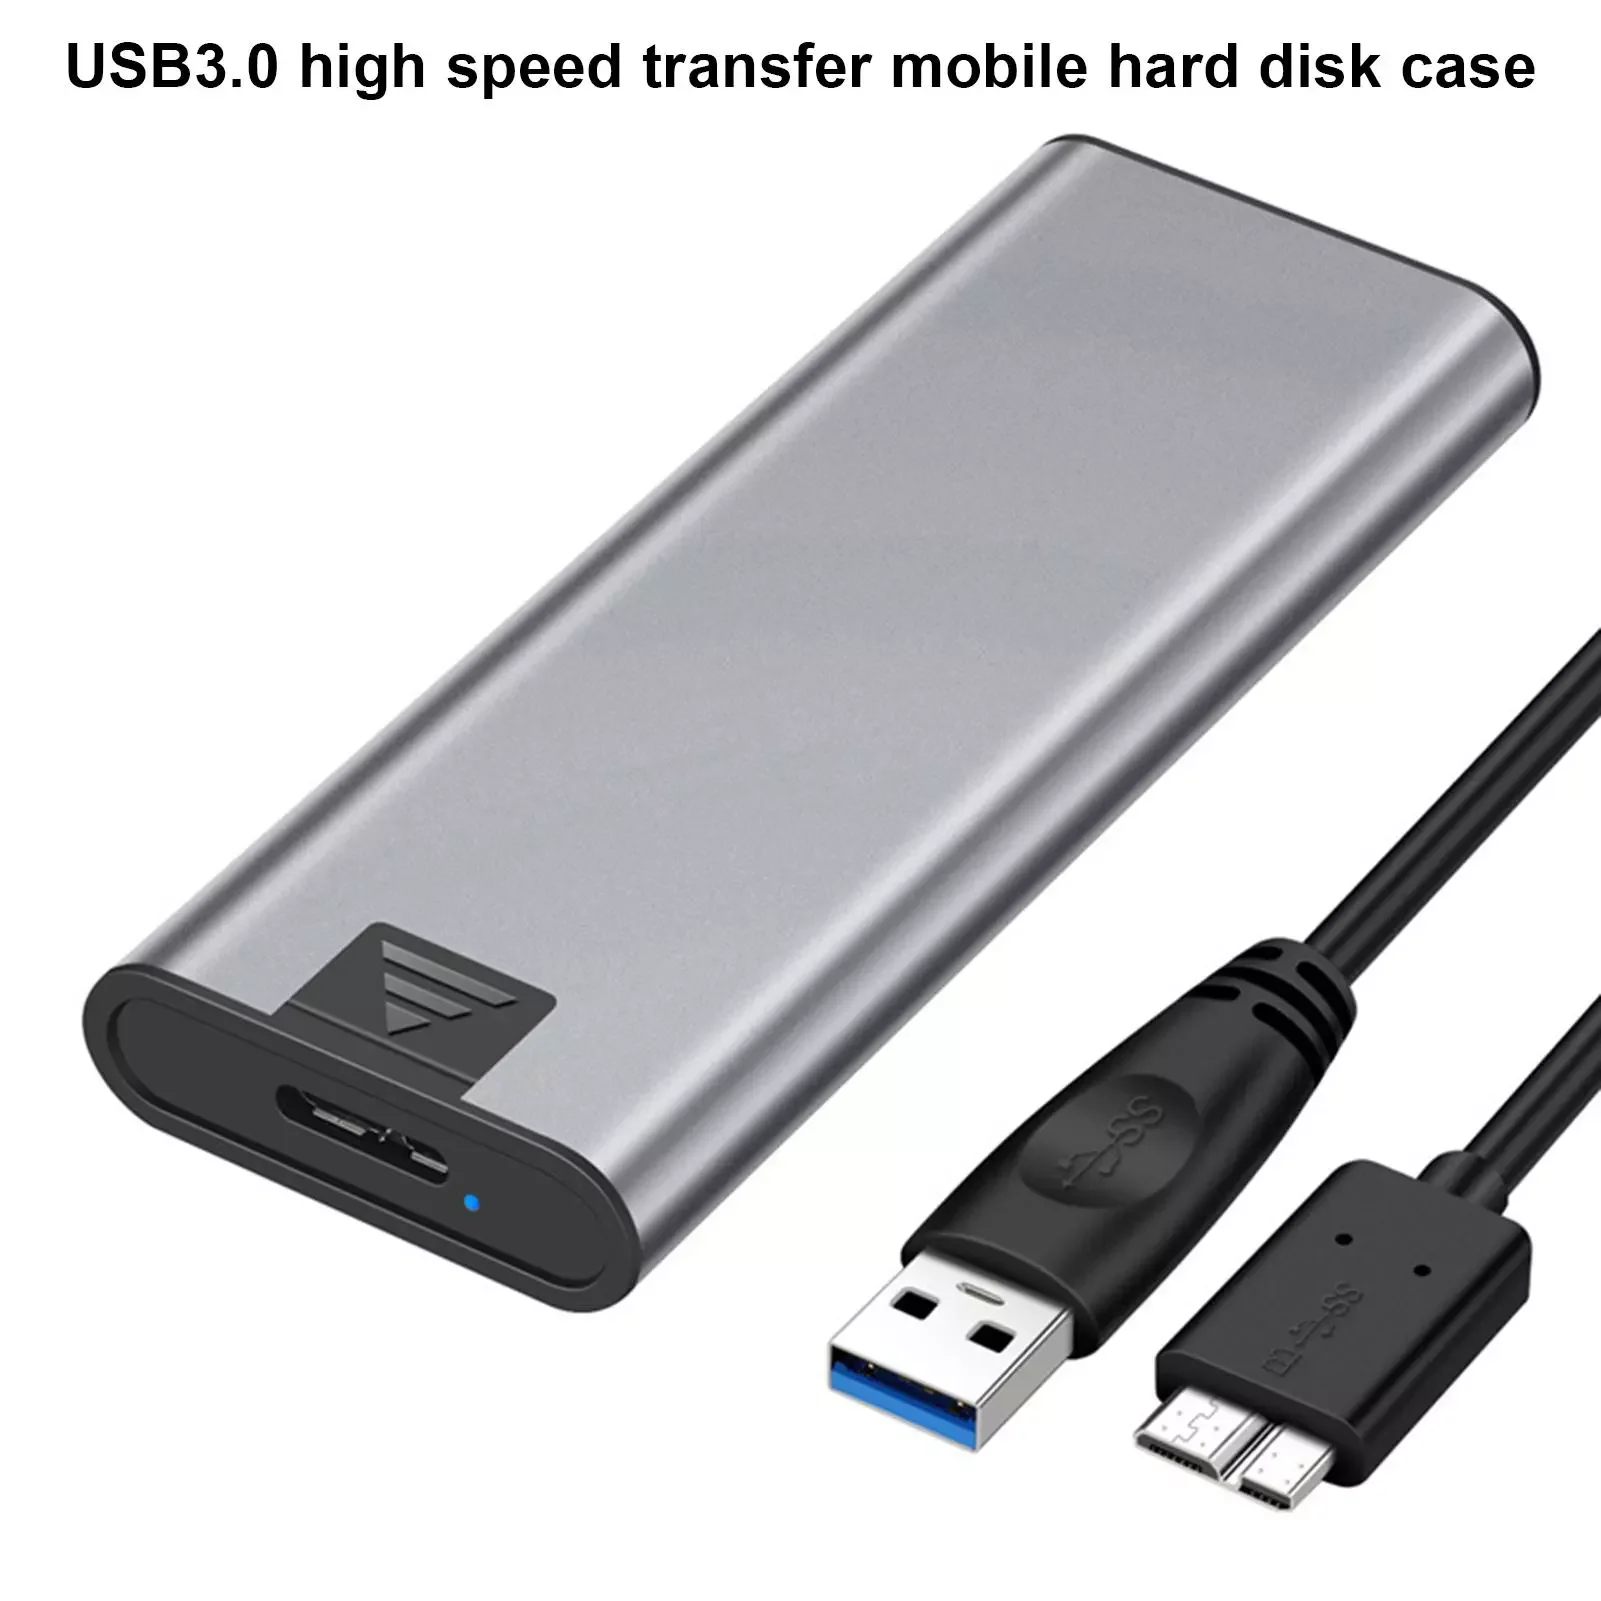 M-01 NGFF M.2 USB 33.0 HDD Enclosure 6Gbs Port SATA SSD Hard Drive Case Support Mobile External HDD Case